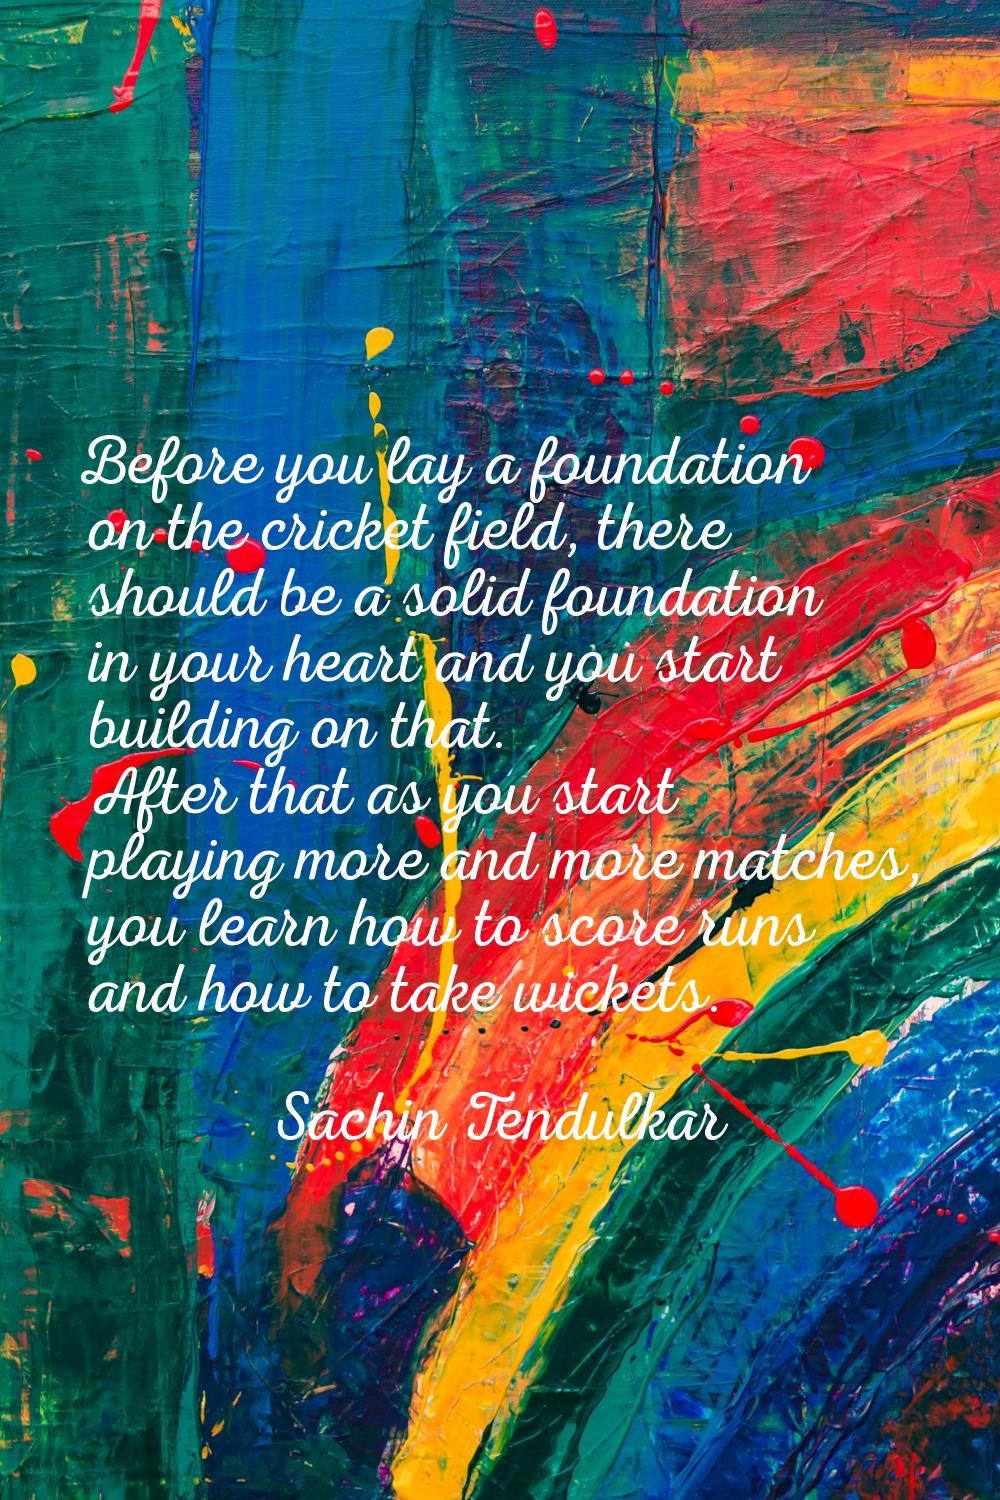 Before you lay a foundation on the cricket field, there should be a solid foundation in your heart 